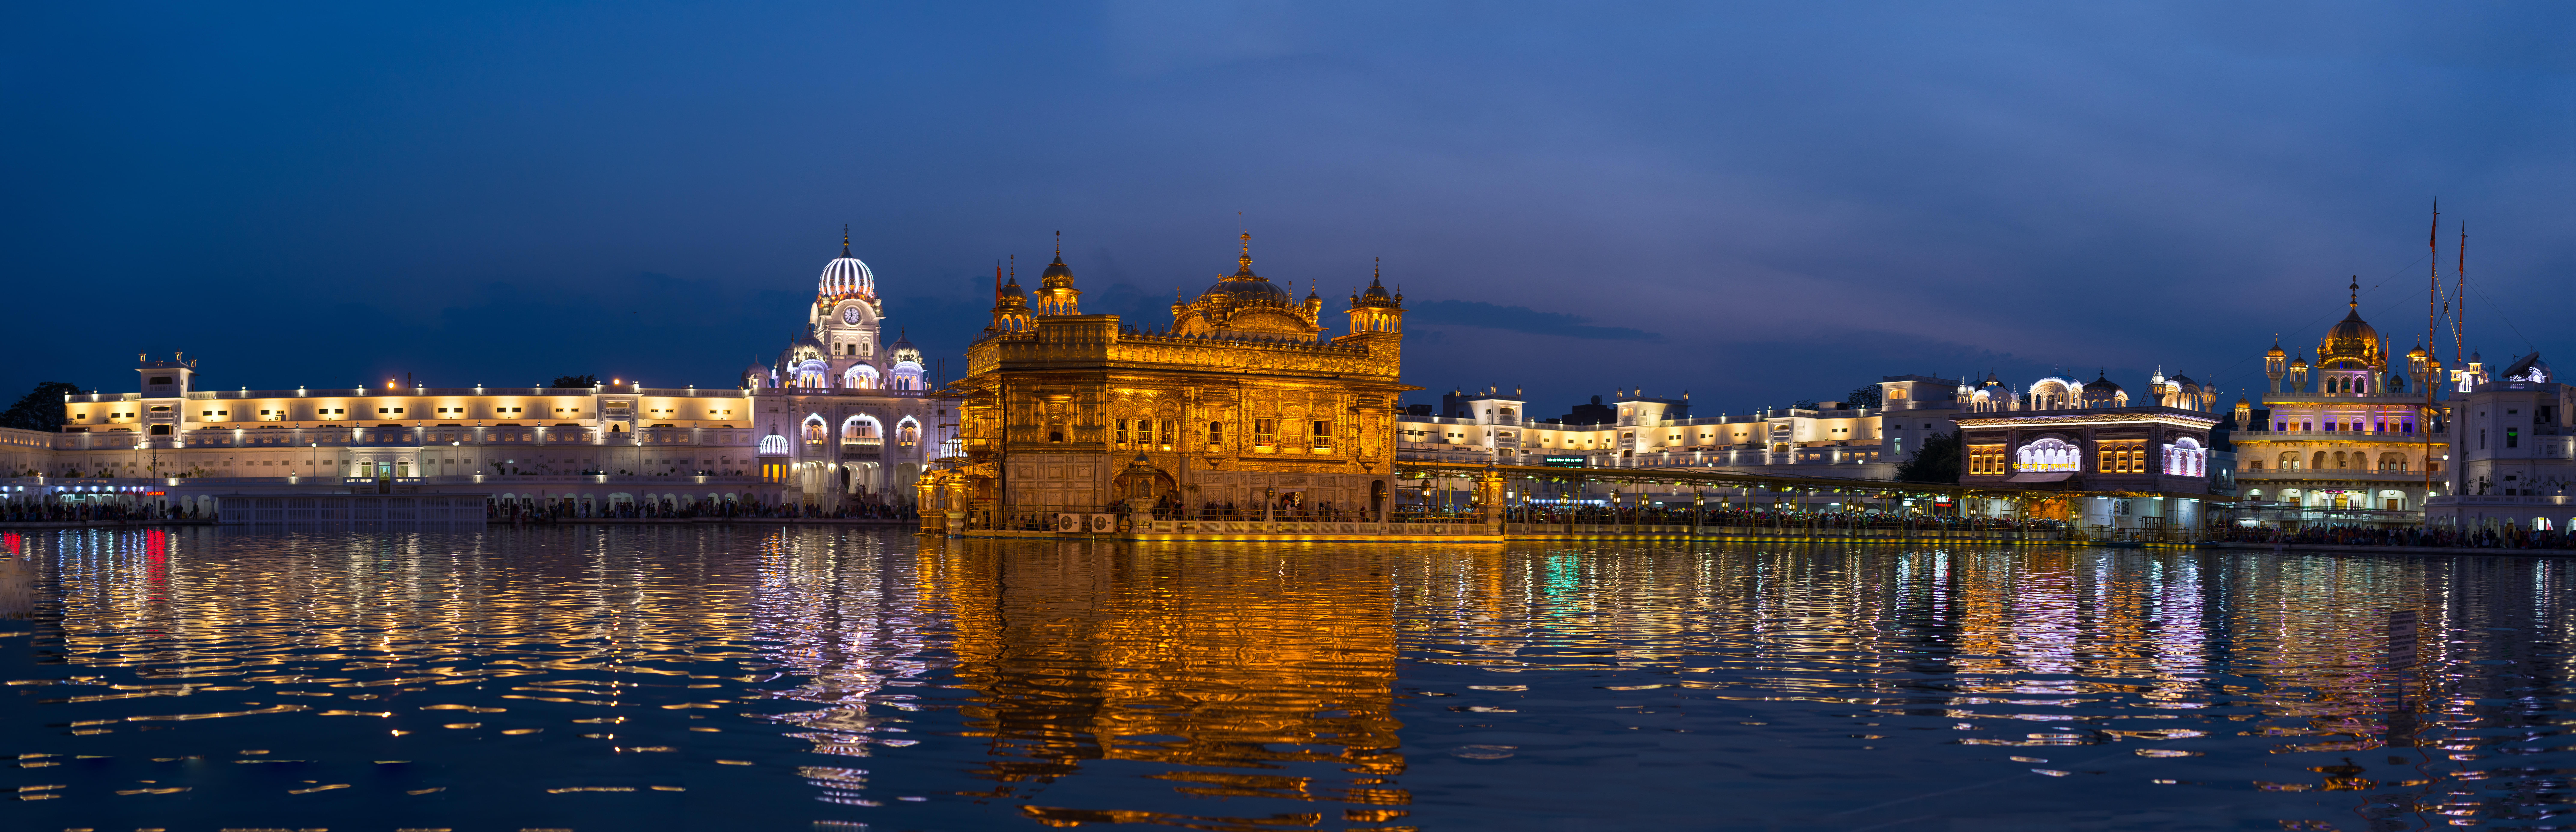 Things to Do in Amritsar